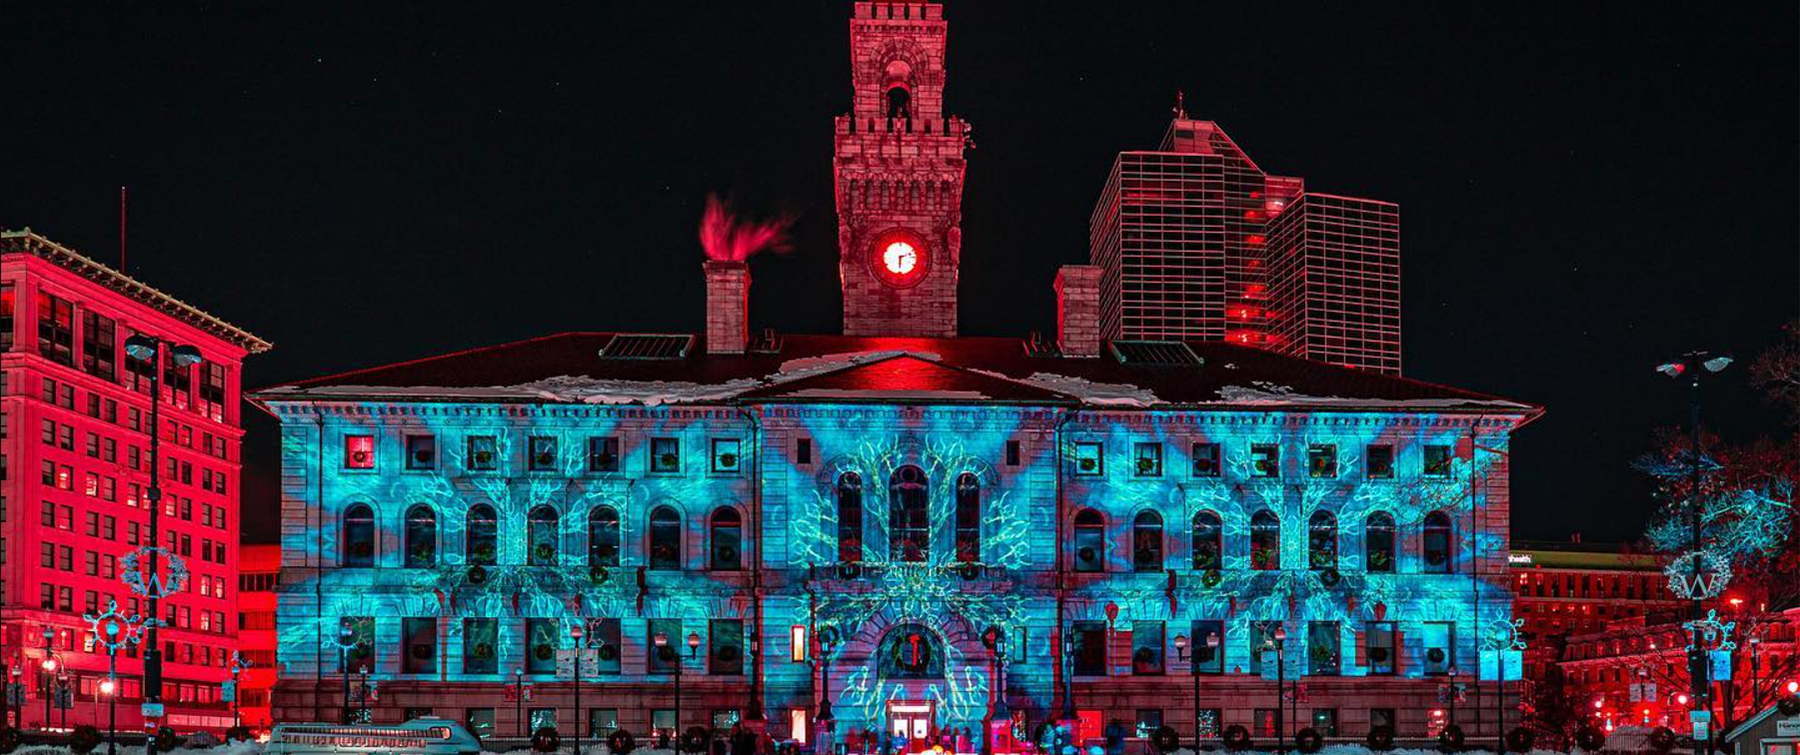 City Hall Façade During Festival of Lights with Projected Snowflake Image